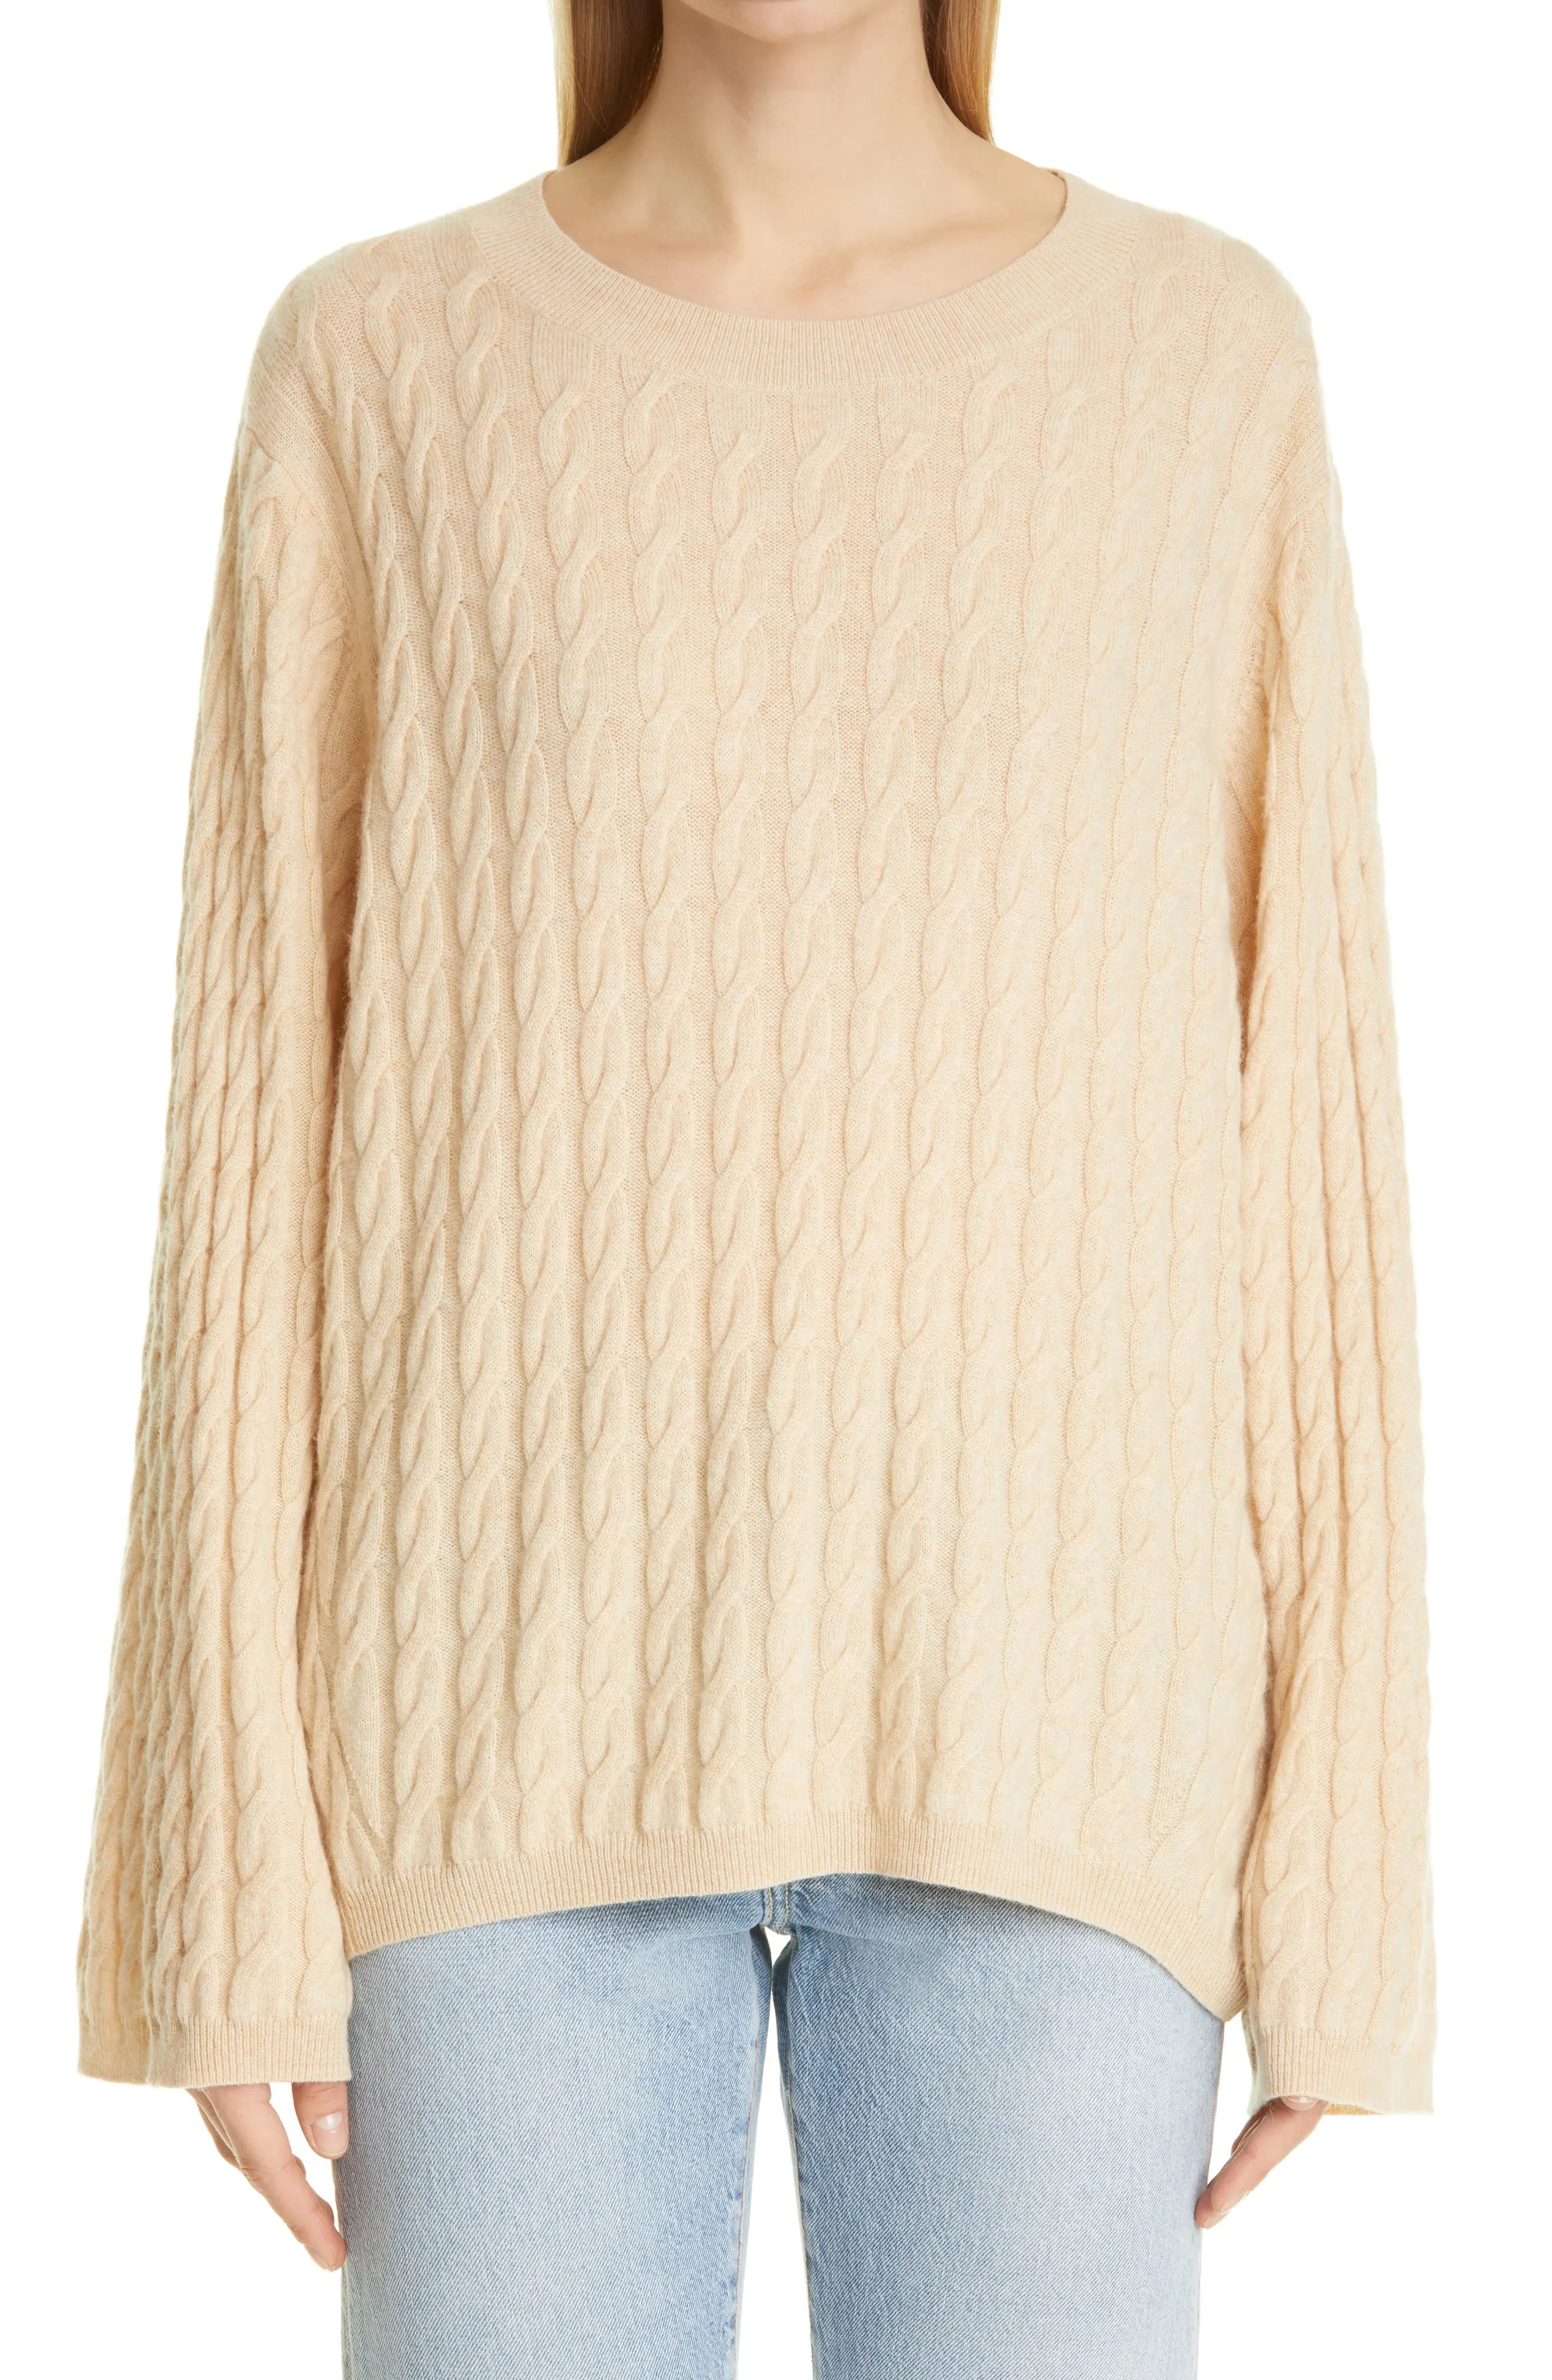 Toteme Women's Cable Stitch Cashmere Sweater in Crumble at Nordstrom, Size Large | Nordstrom